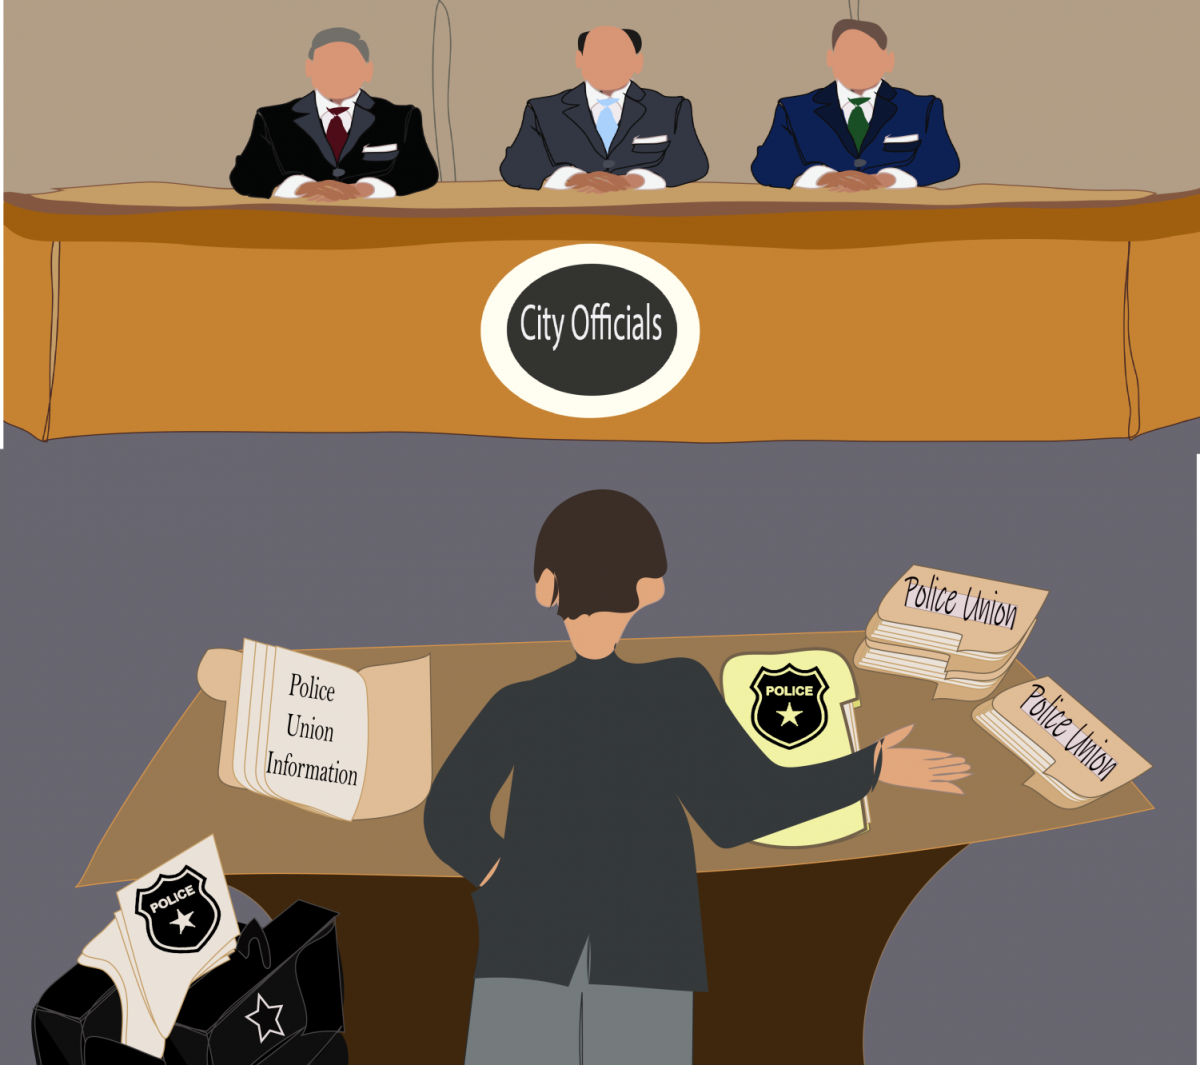 An illustration of a lawyer for police unions standing before three male city officials making demands on behalf of the union. Various folders are laid out in front of the lawyer that read, “Police Union Information” and “Police.”